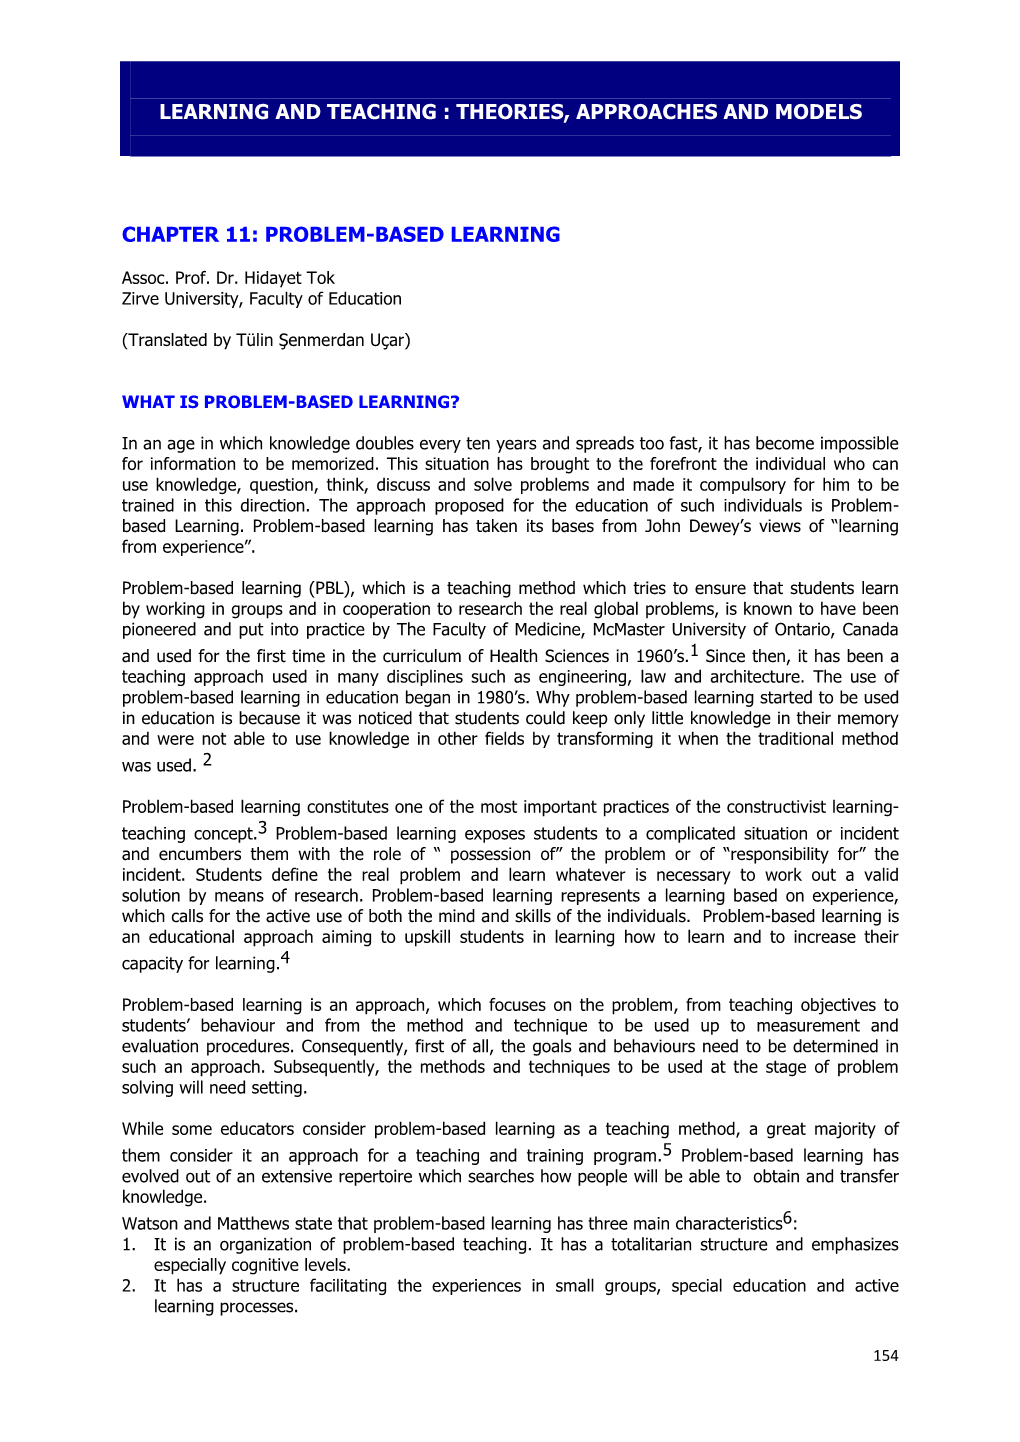 Learning and Teaching : Theories, Approaches and Models